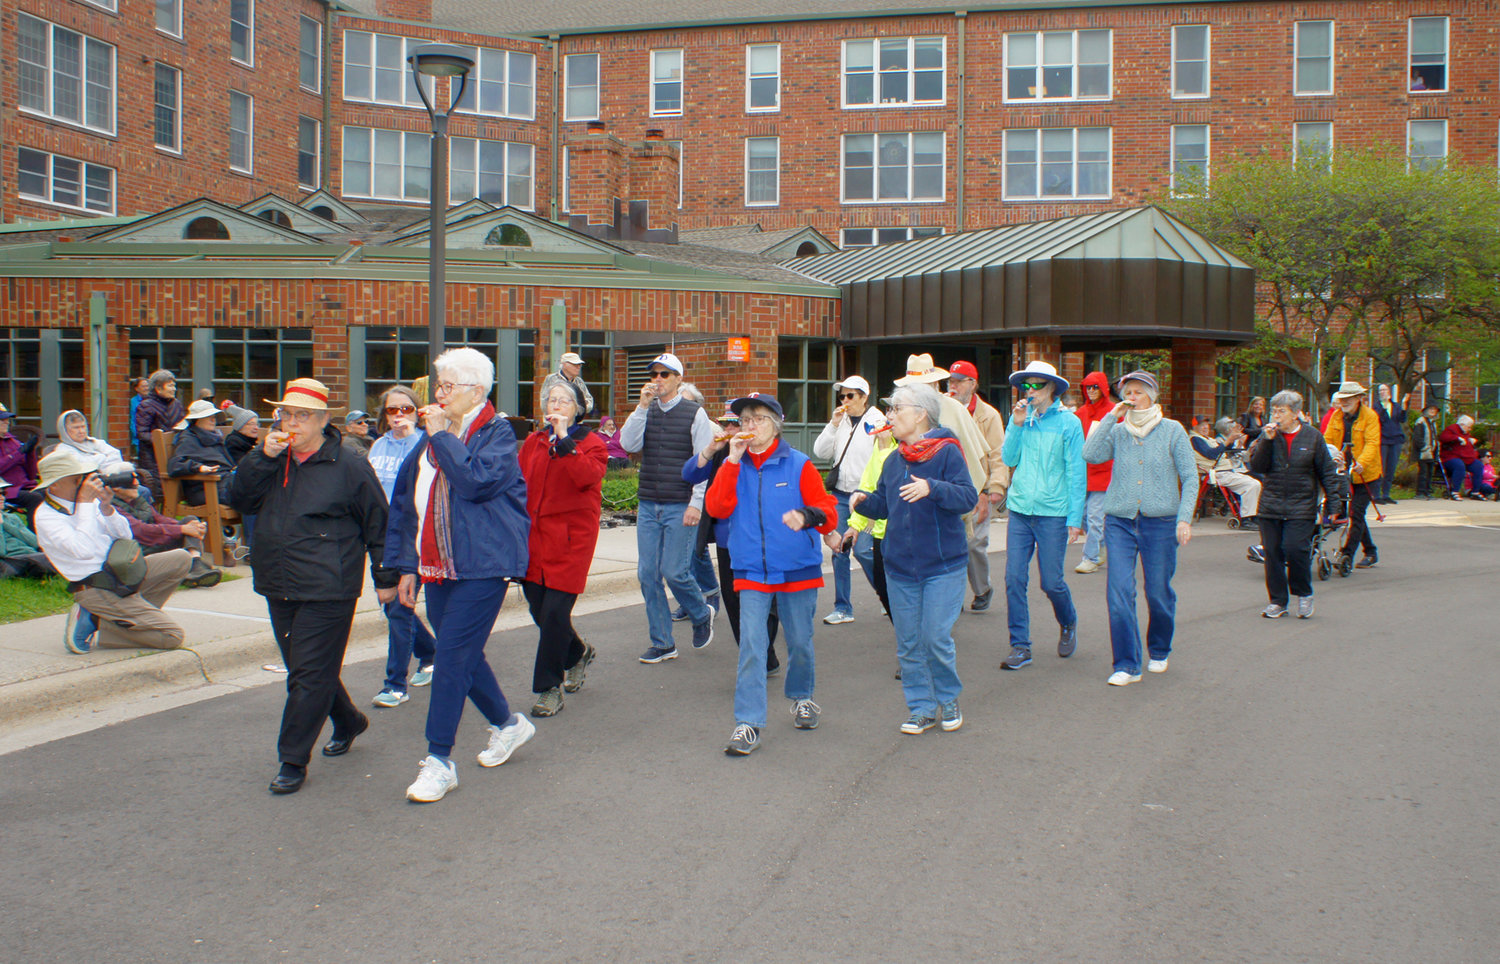 The kazoo band marches in front of Becketwood. AT RIGHT: Dancers (left to right) Anita Doyle, Vanji Bratt, Judy Bahn, and Carol Mockovak.